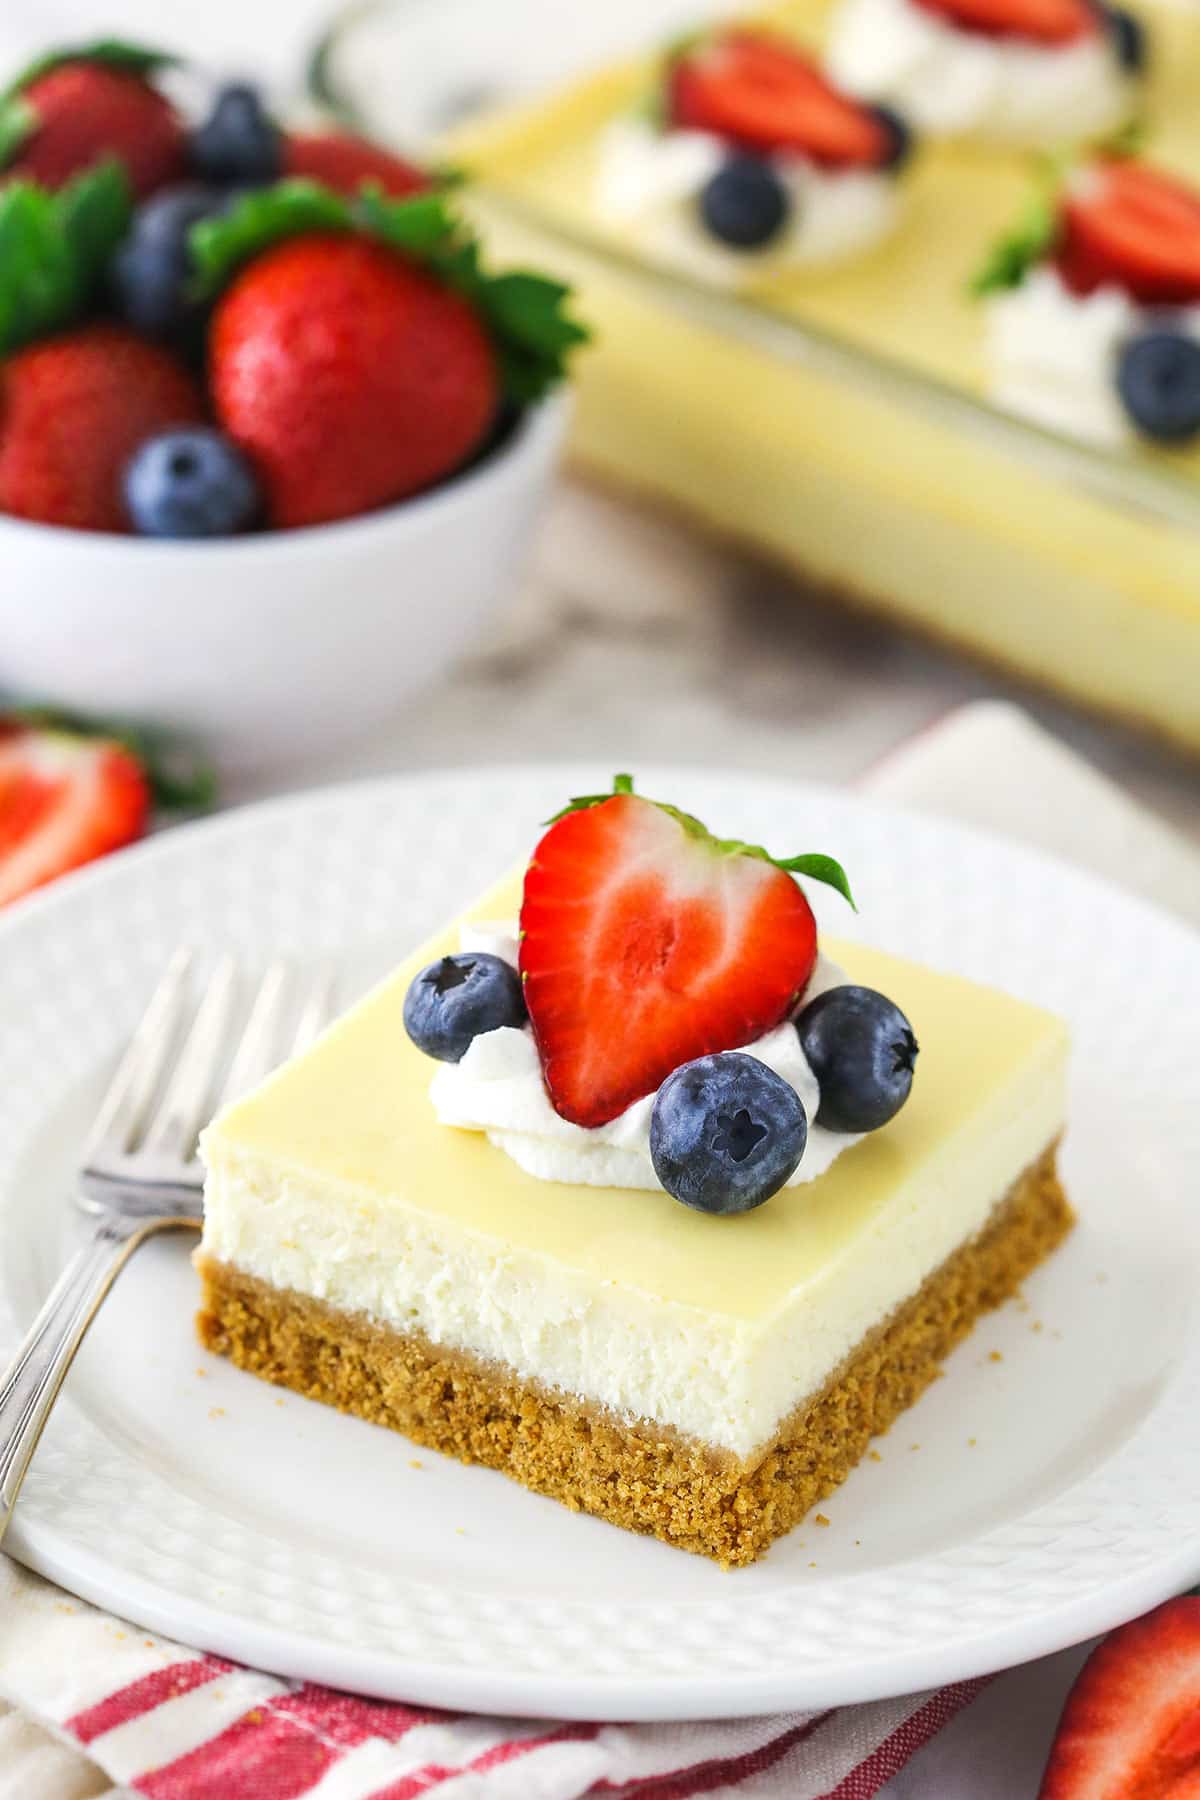 A slice of easy cheesecake on a plate with a fork near a bowl of berries and a full cheesecake.